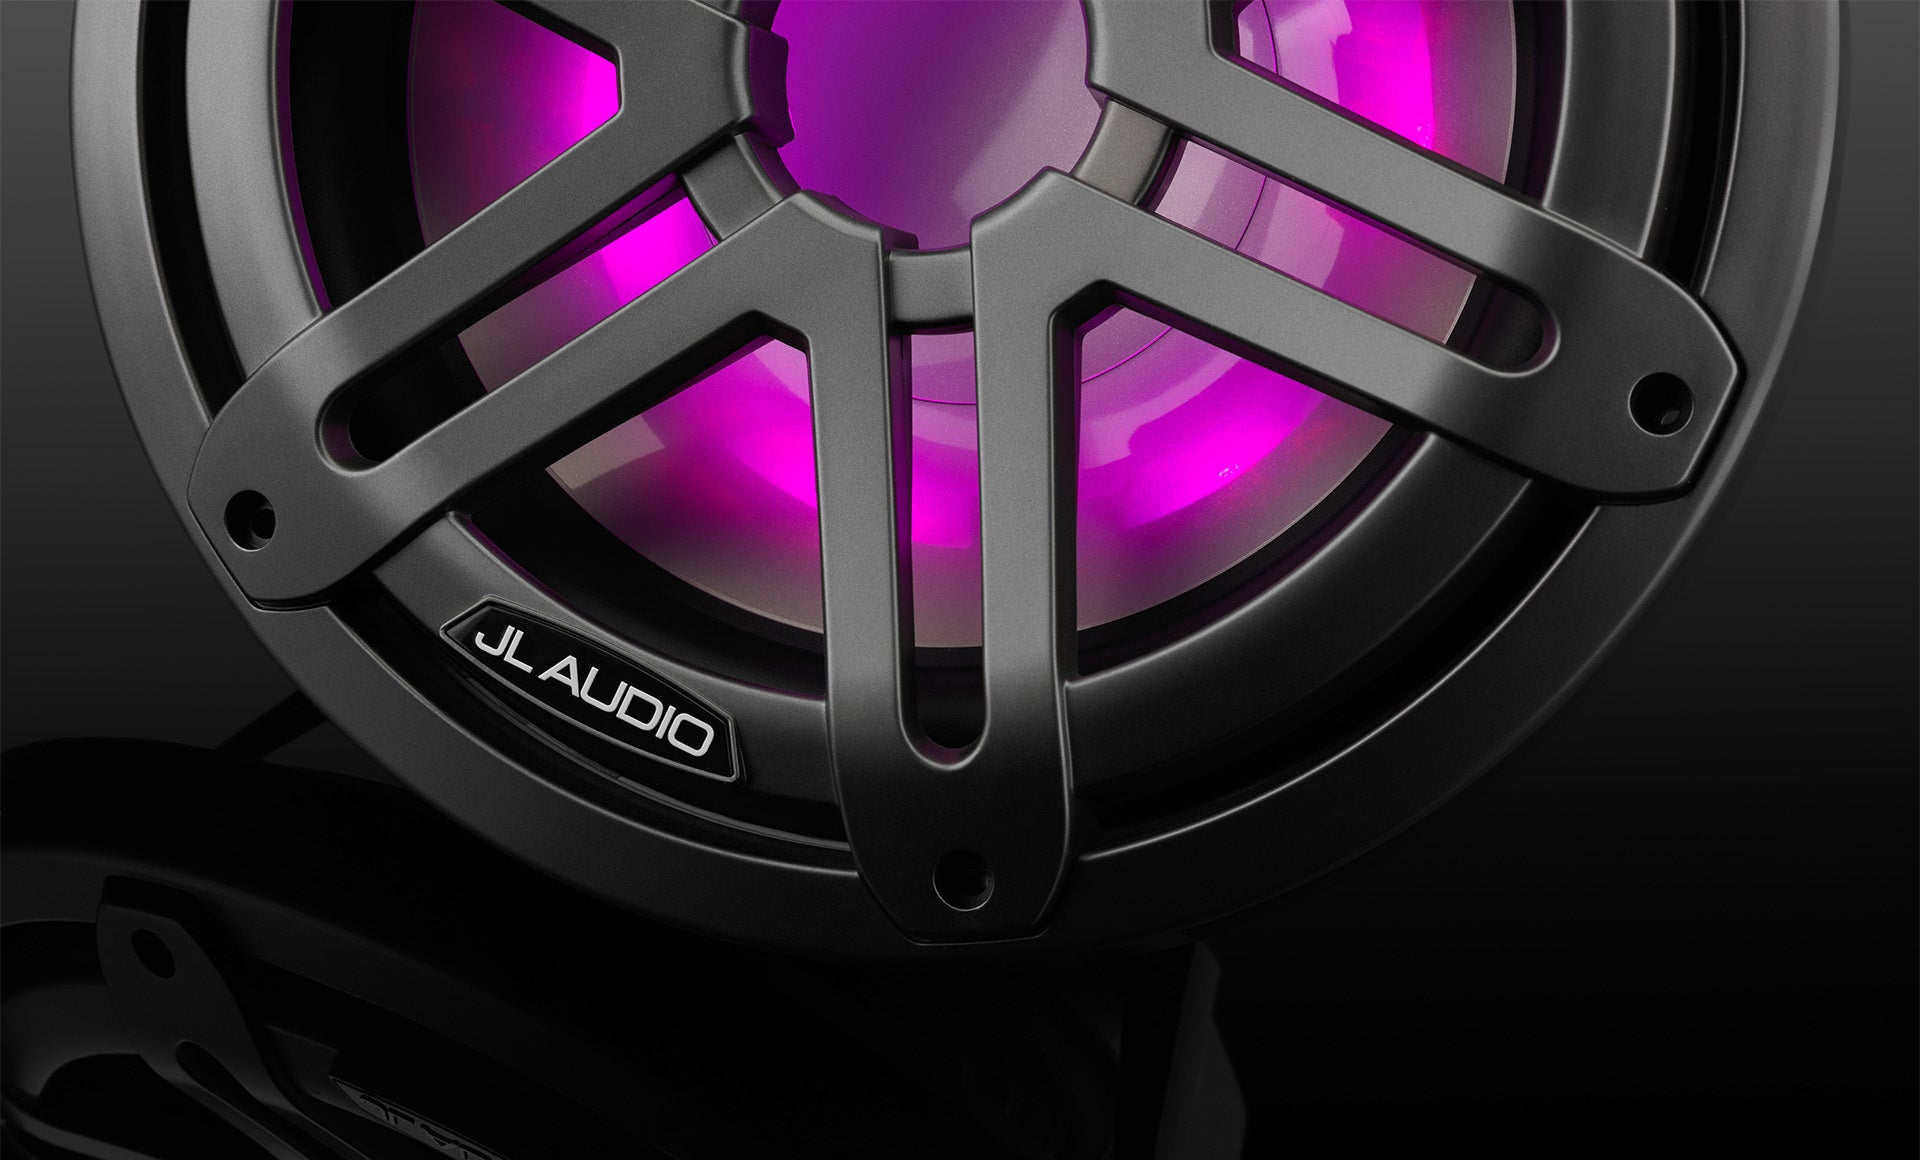 A M3 10 inch marine subwoofer unit with pink RGB LED lights in a dark sleek setting.